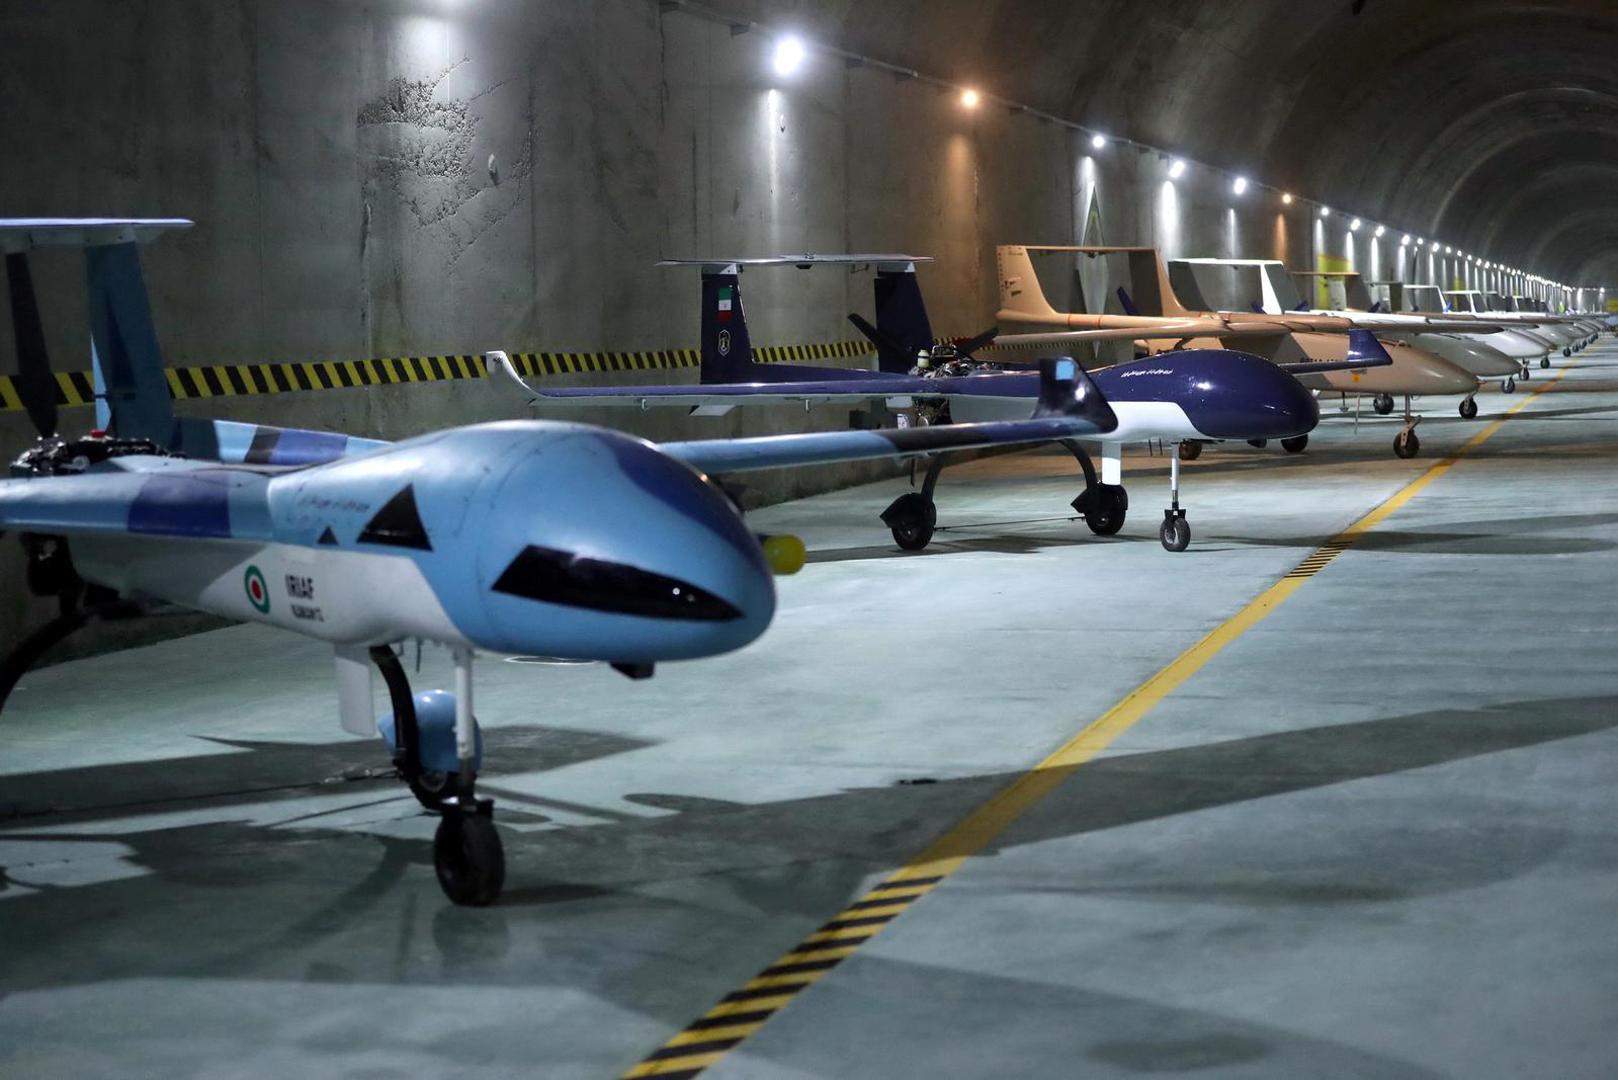 Drones are seen at an underground site at an undisclosed location in Iran, in this handout image obtained on May 28, 2022. Iranian Army/WANA (West Asia News Agency)/Handout via REUTERS ATTENTION EDITORS - THIS IMAGE HAS BEEN SUPPLIED BY A THIRD PARTY. Photo: Wana News Agency/REUTERS